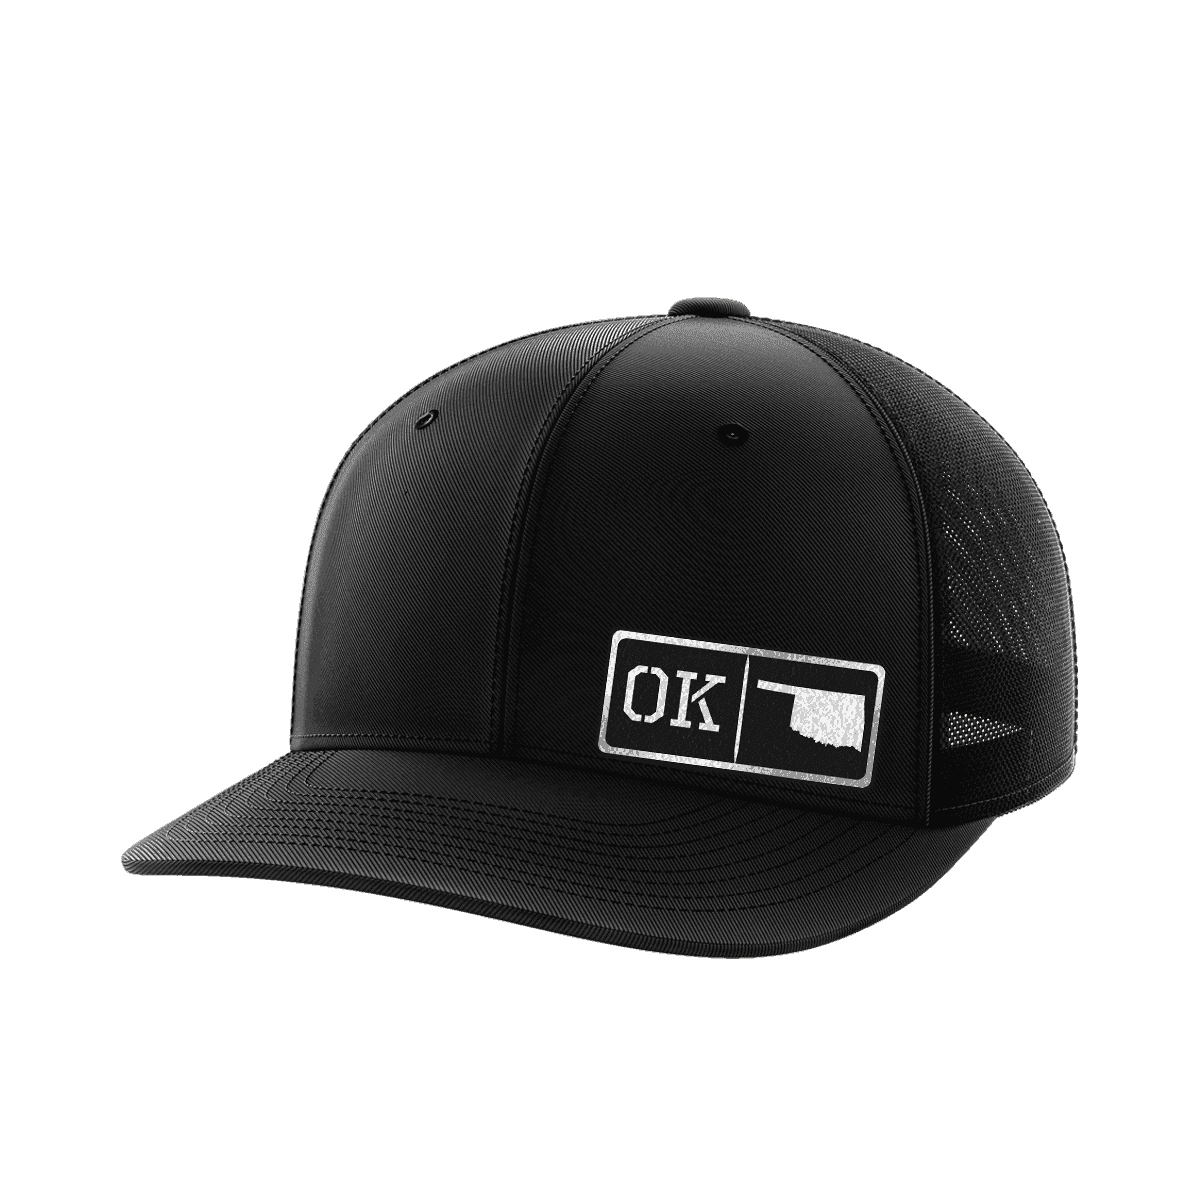 Oklahoma Homegrown Collection (black leather)